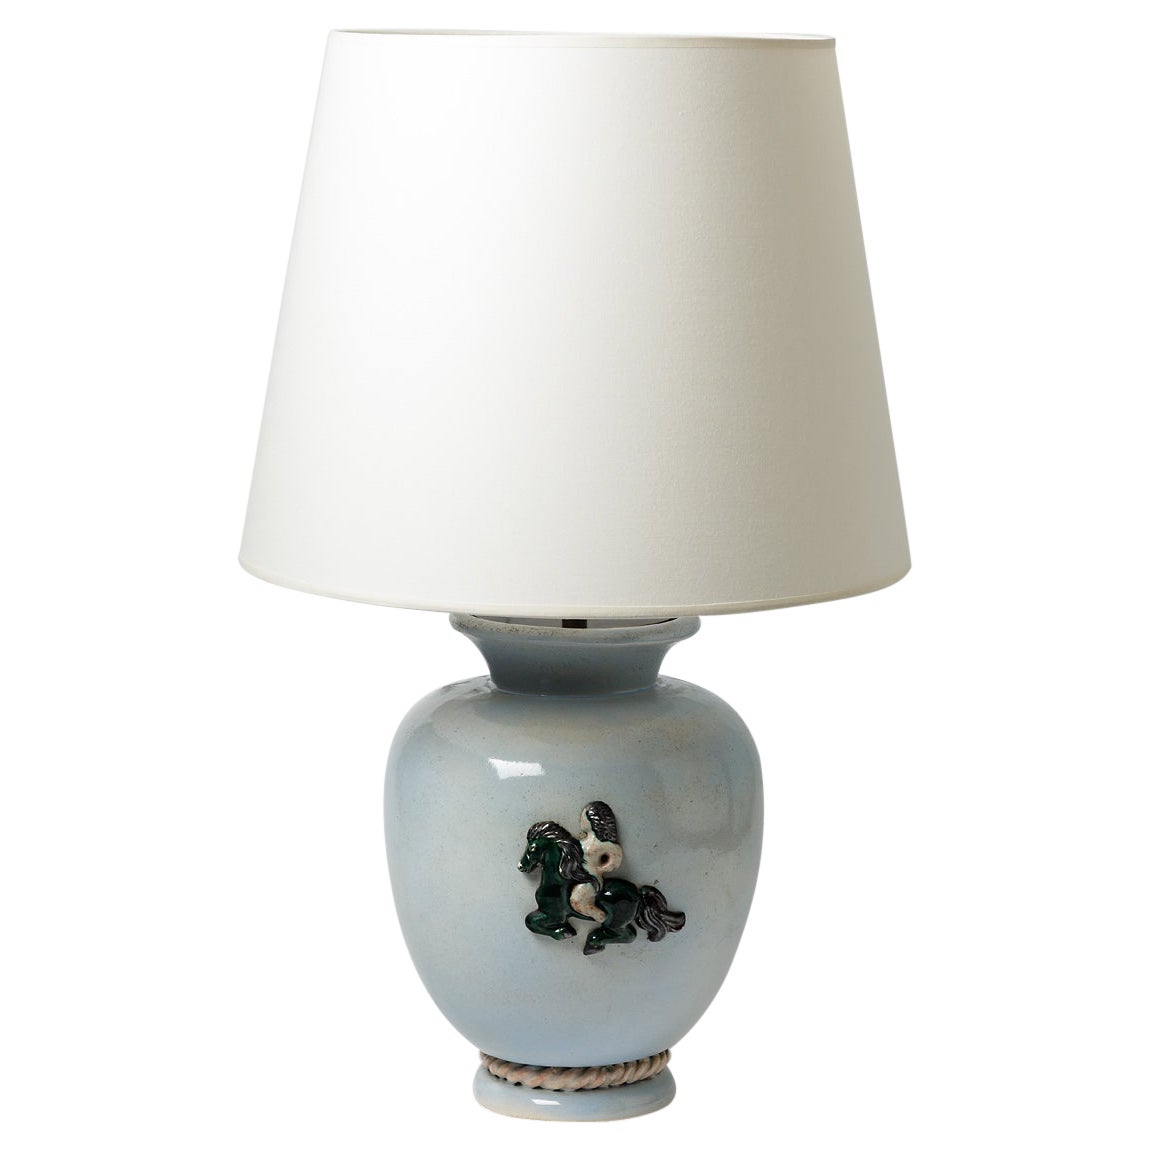 Blue glazed ceramic table lamp by Pol Pouchol, circa 1940-1950 For Sale